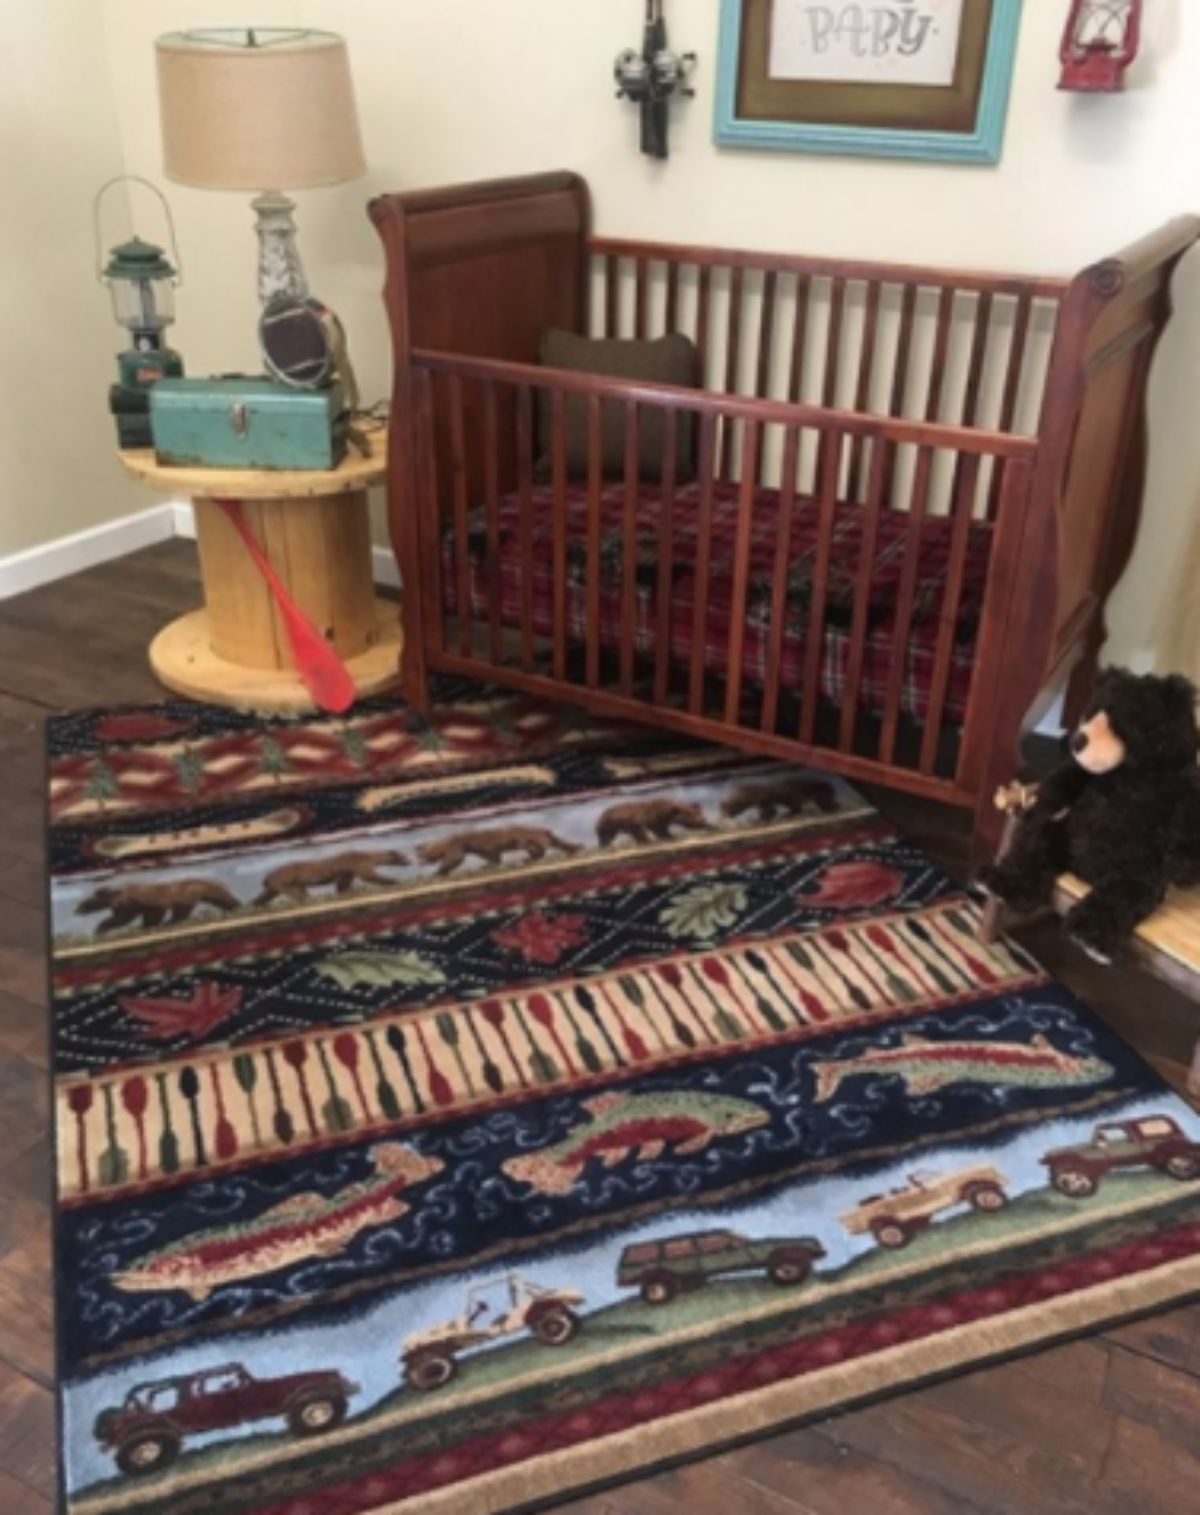 wildlife themed rug beside a baby's cot